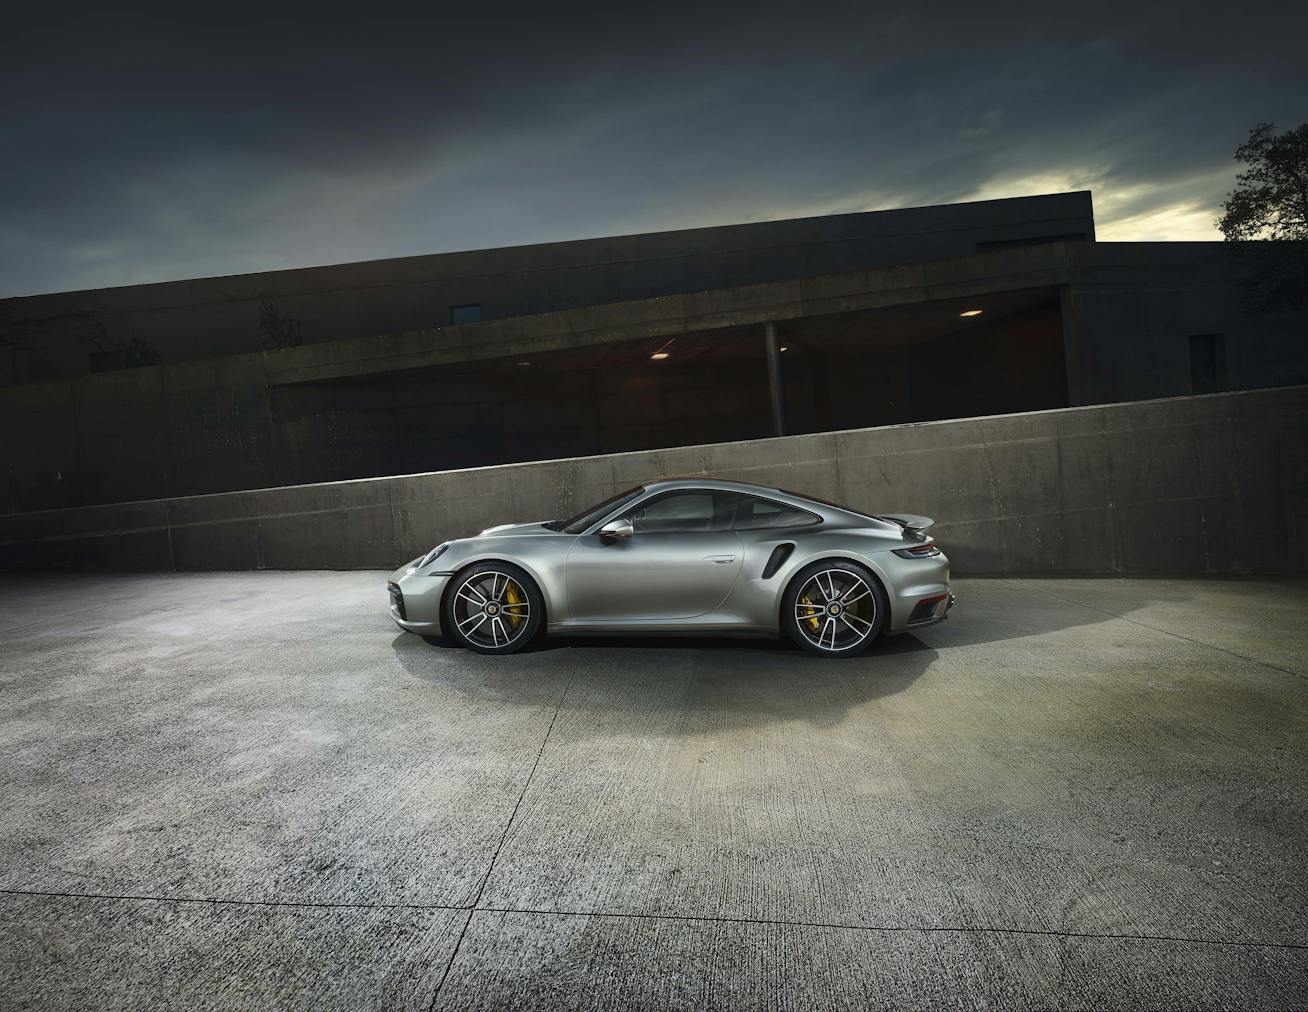 Silver Porsche 911 Turbo S (type 992) by modernist buildings